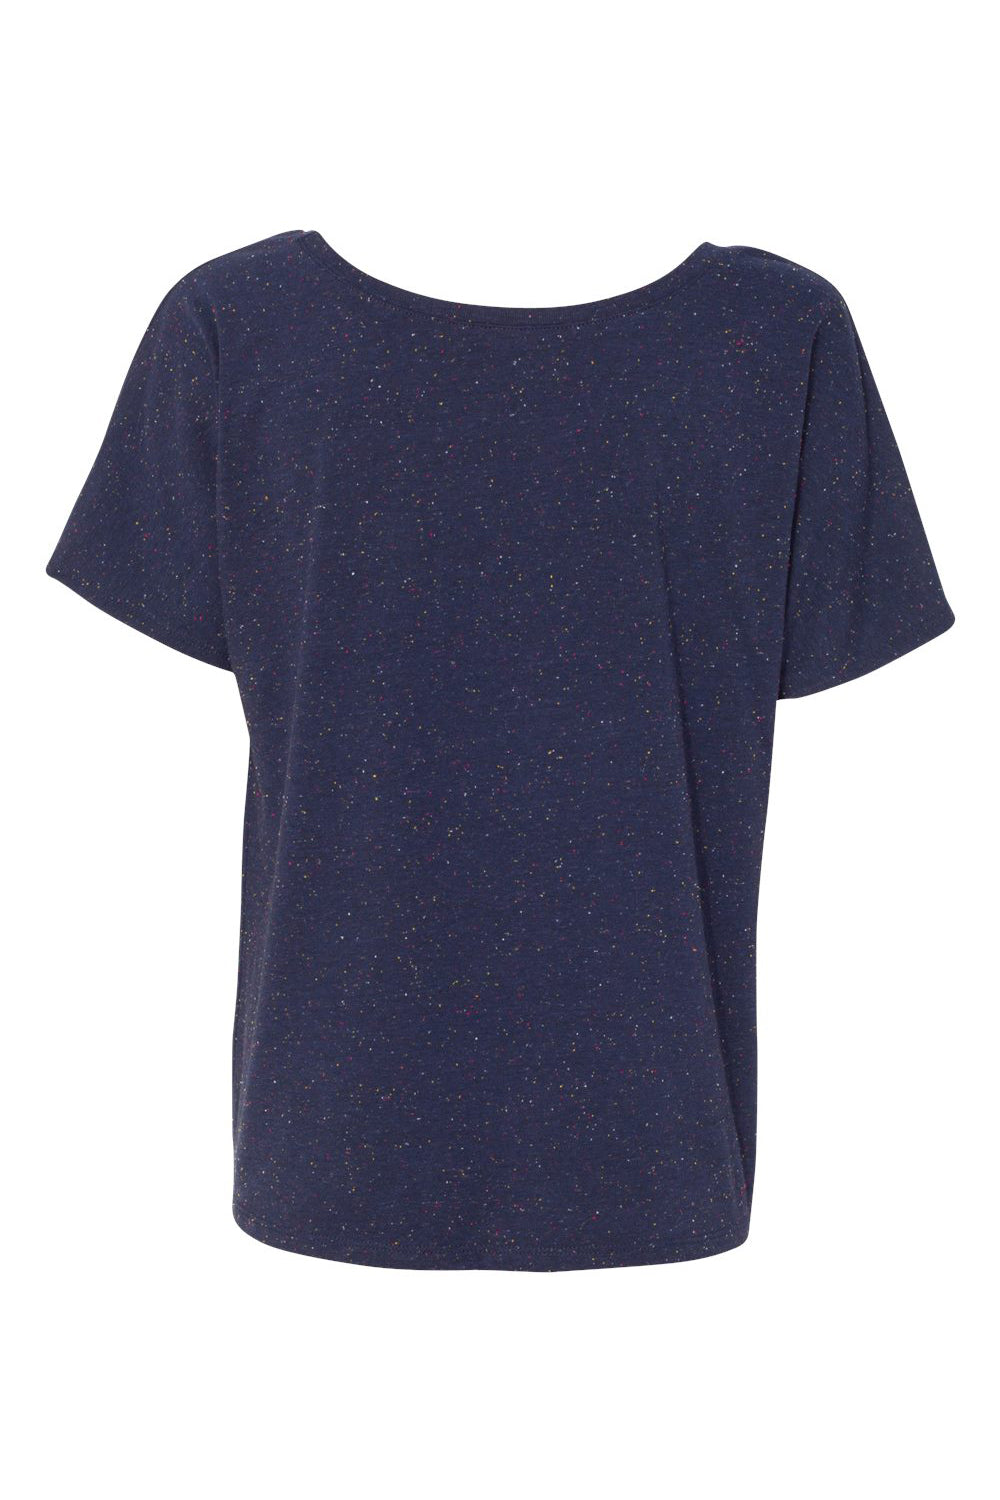 Bella + Canvas BC8816/8816 Womens Slouchy Short Sleeve Wide Neck T-Shirt Navy Blue Speckled Flat Back